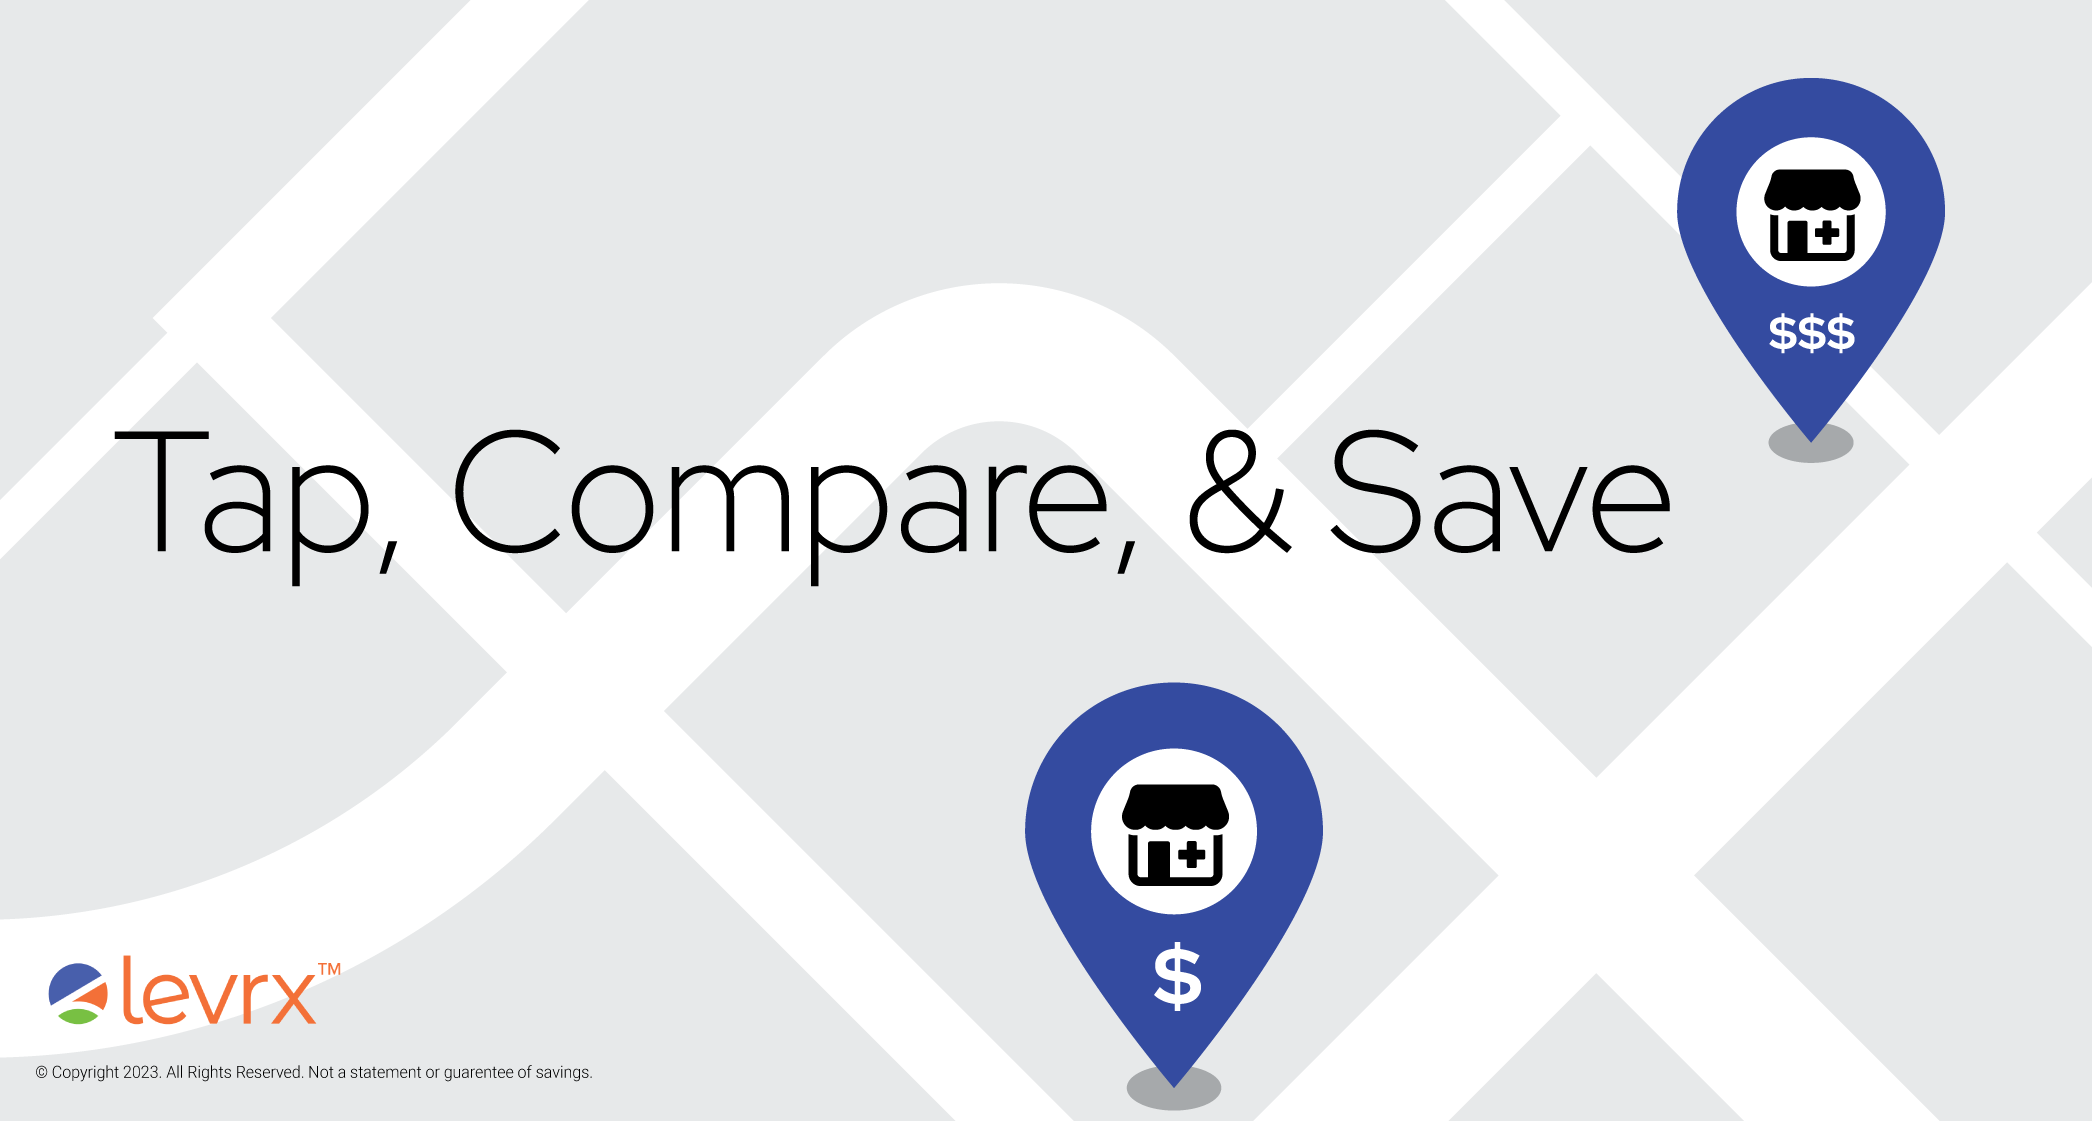 Tap, Compare, & Save. The background is a map with two location icons, indicating one pharmacy is more expensive than the other.